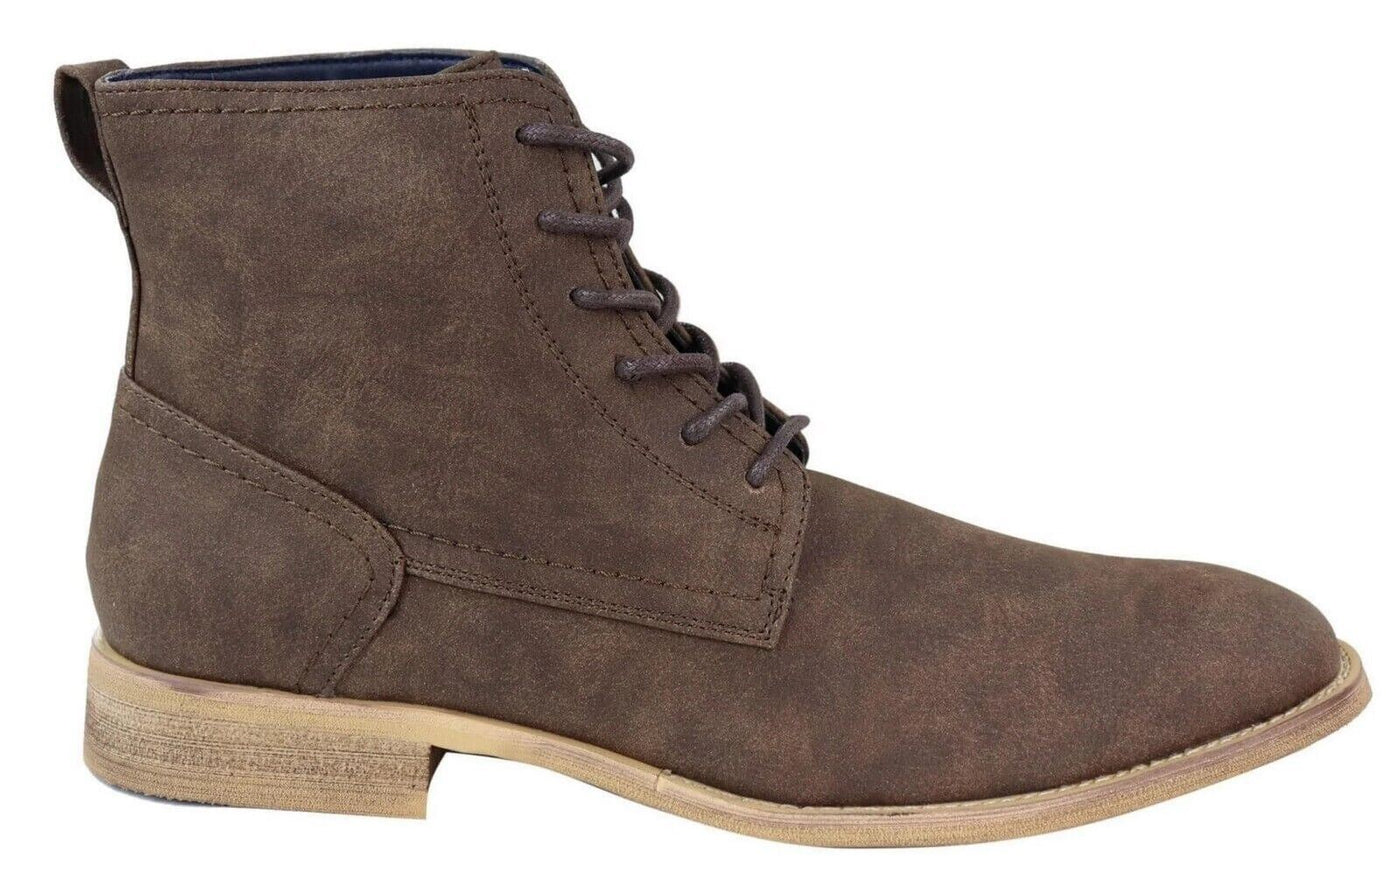 Mens Matt Brown Suede Lace Up Ankle Boots